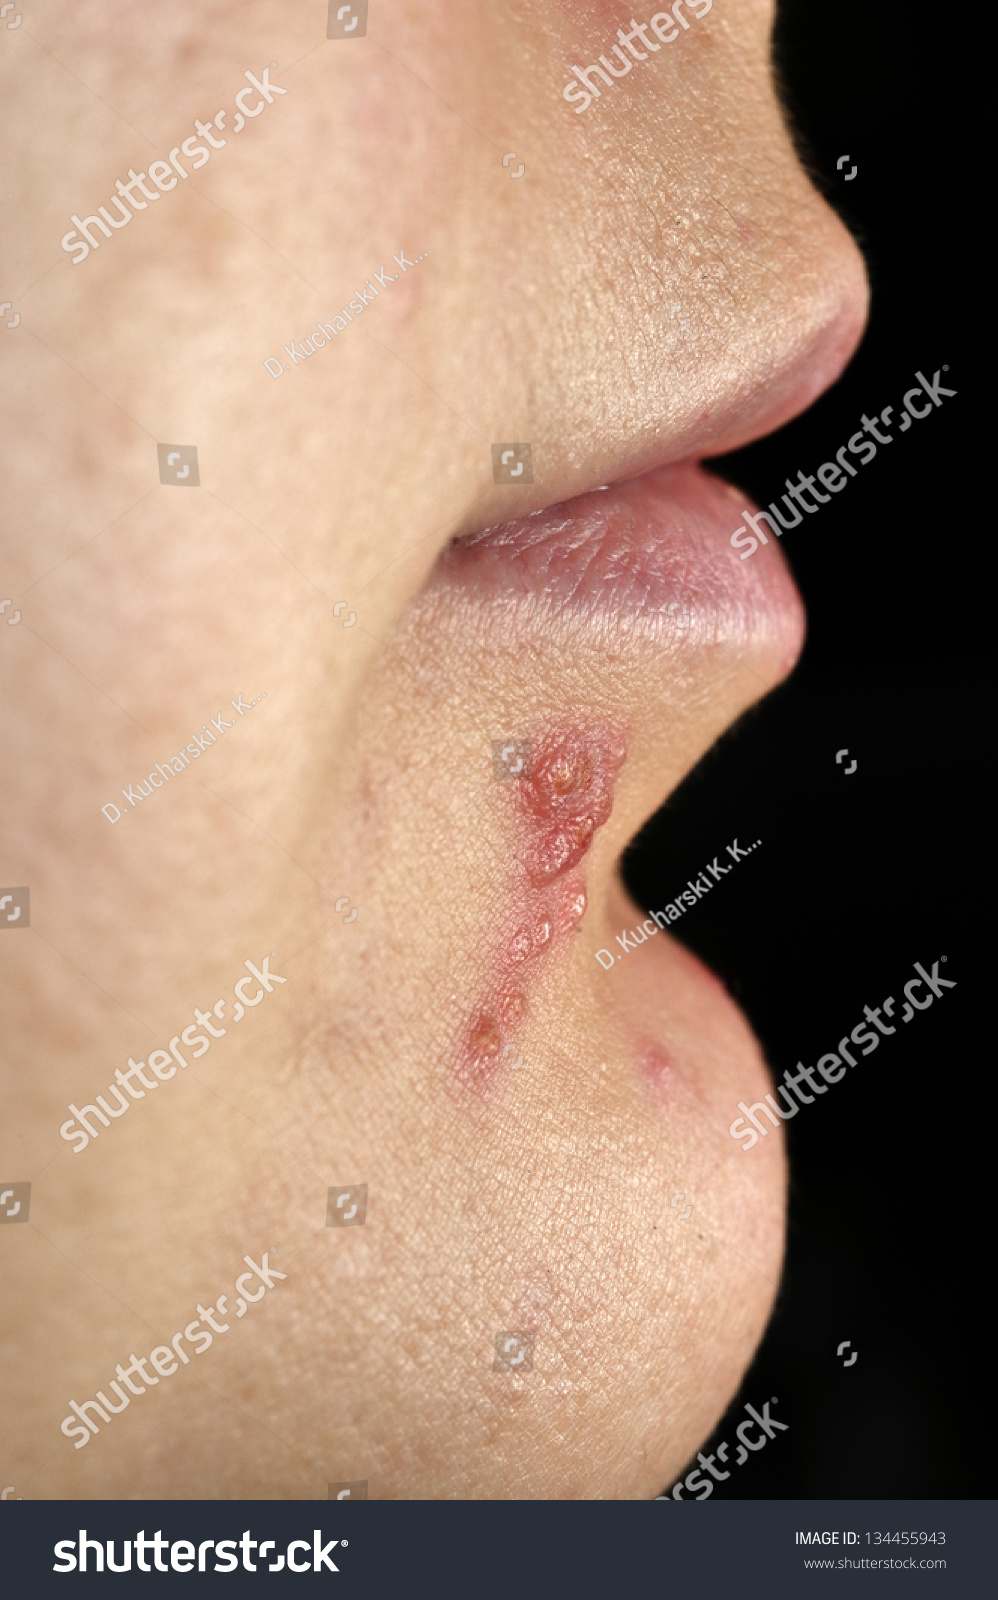 herpes simplex nose pictures